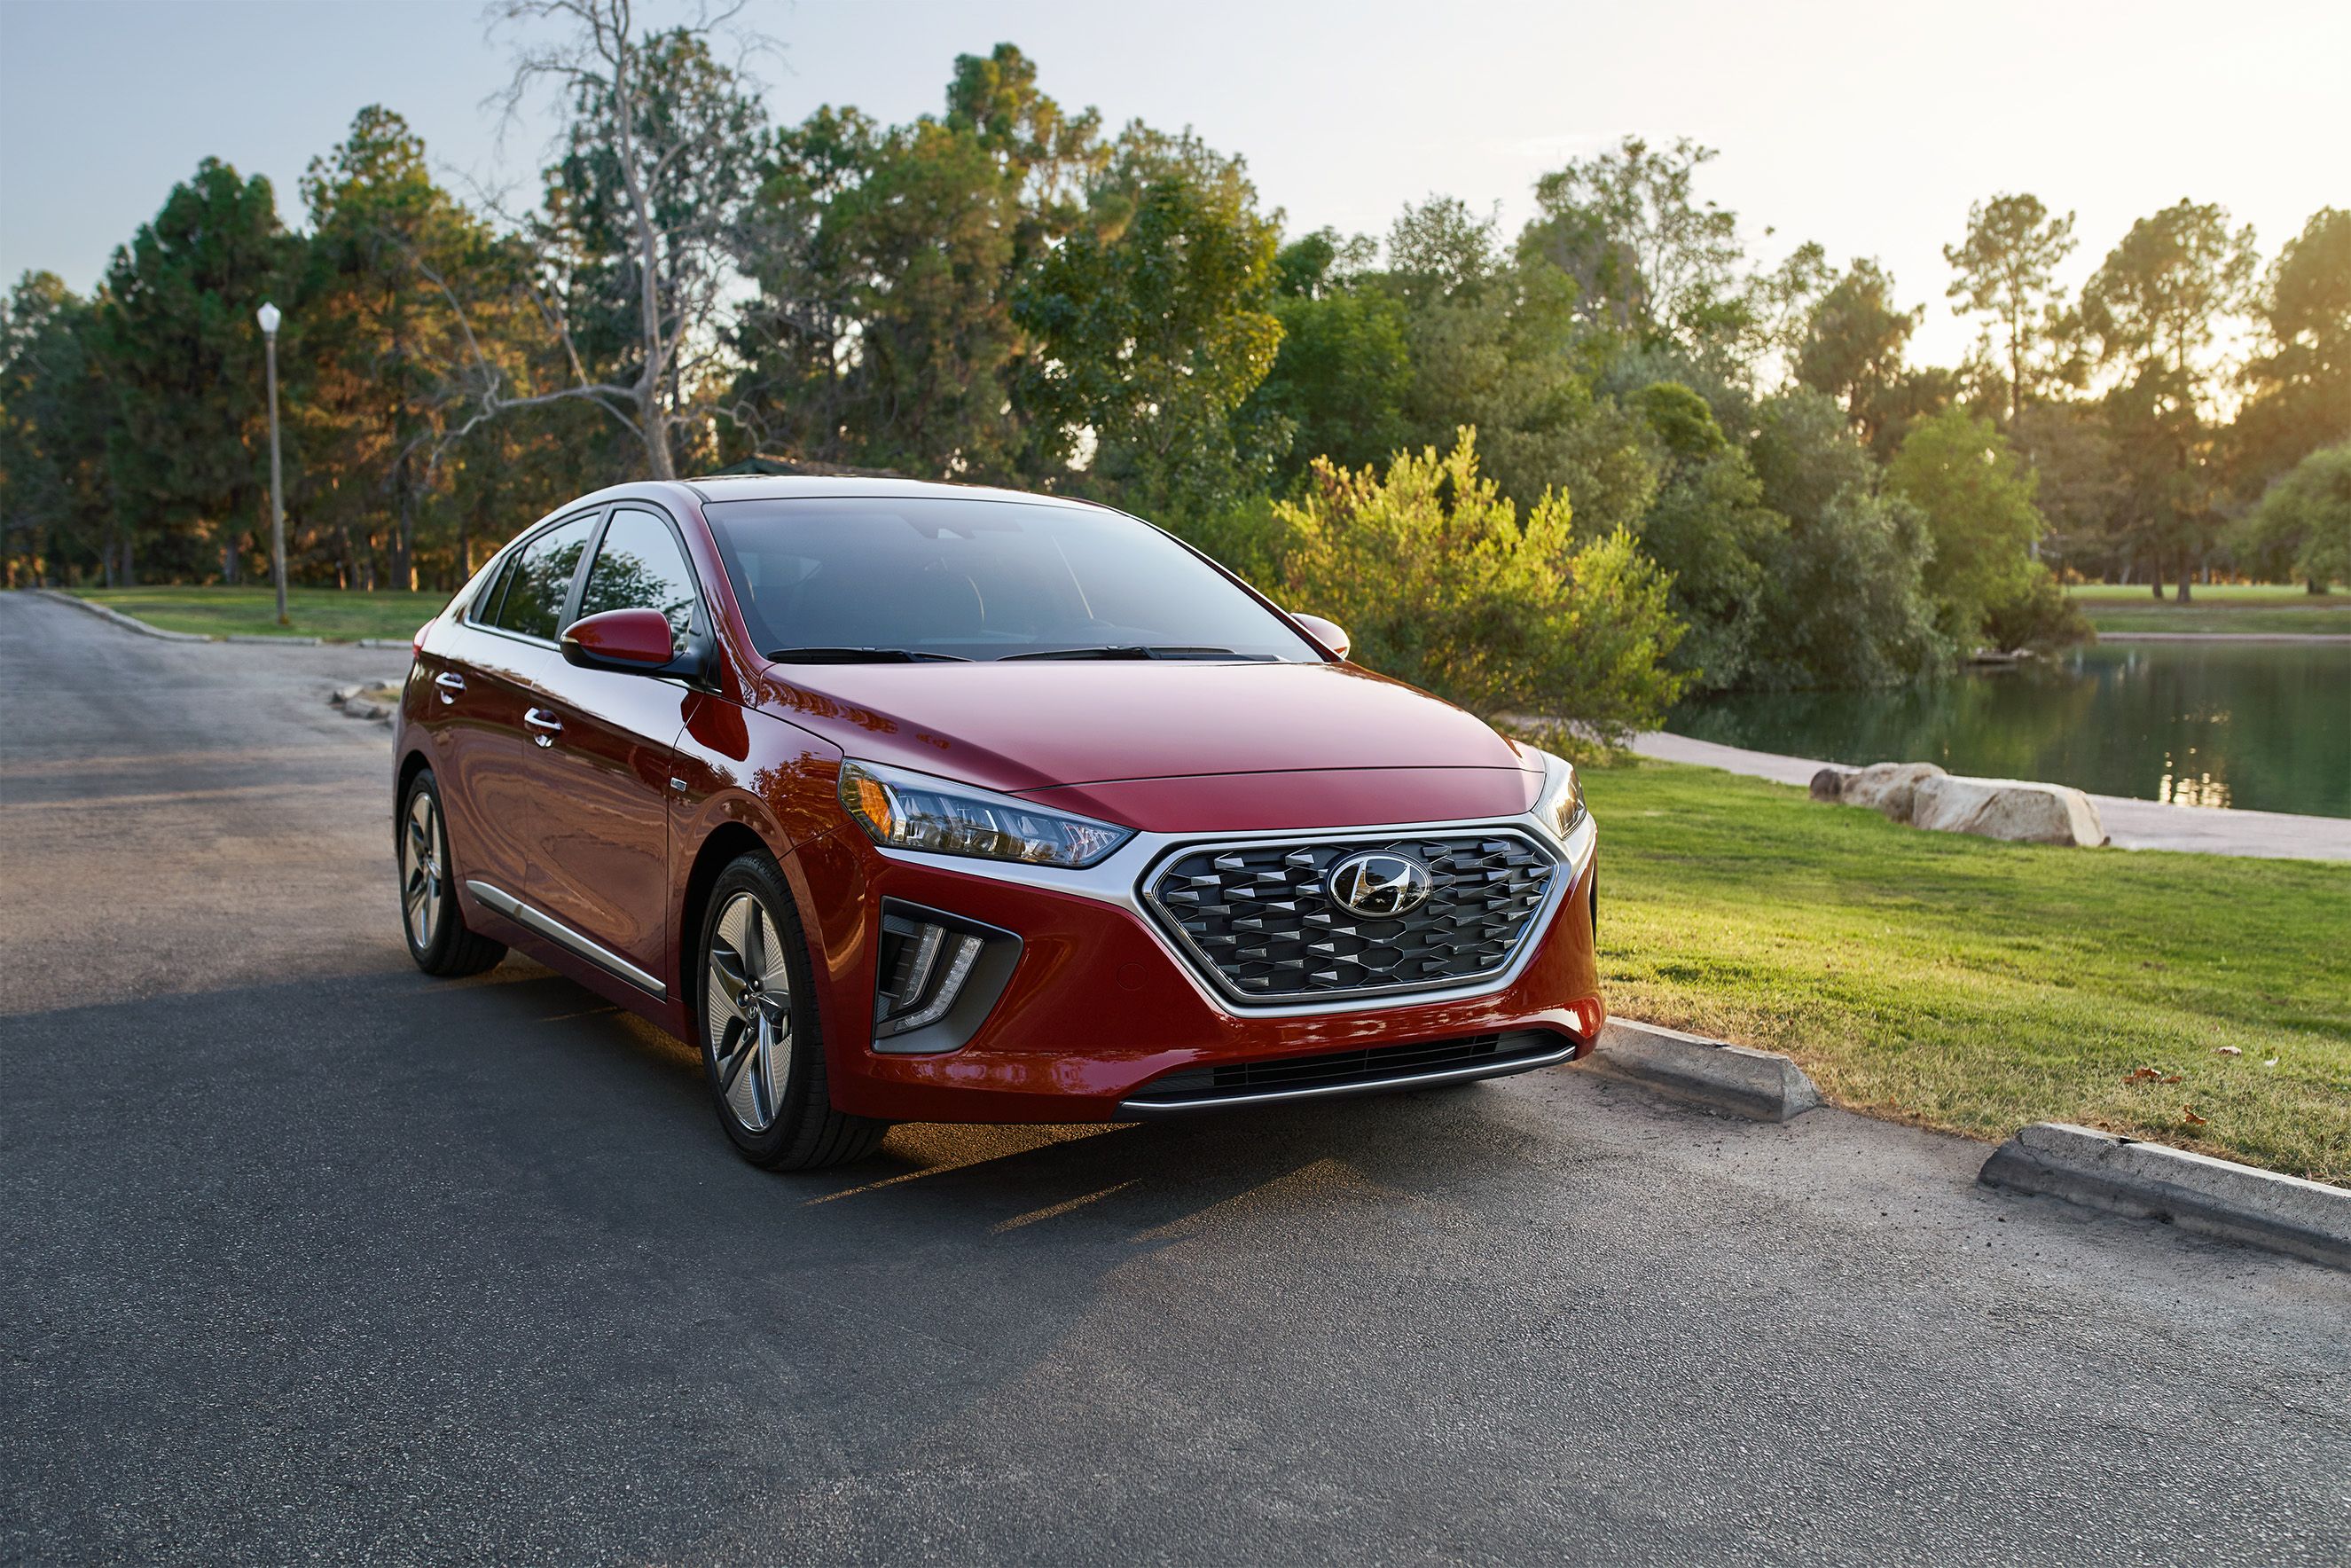 2020 Hyundai Hybrid Offers a Compelling to the Toyota Prius